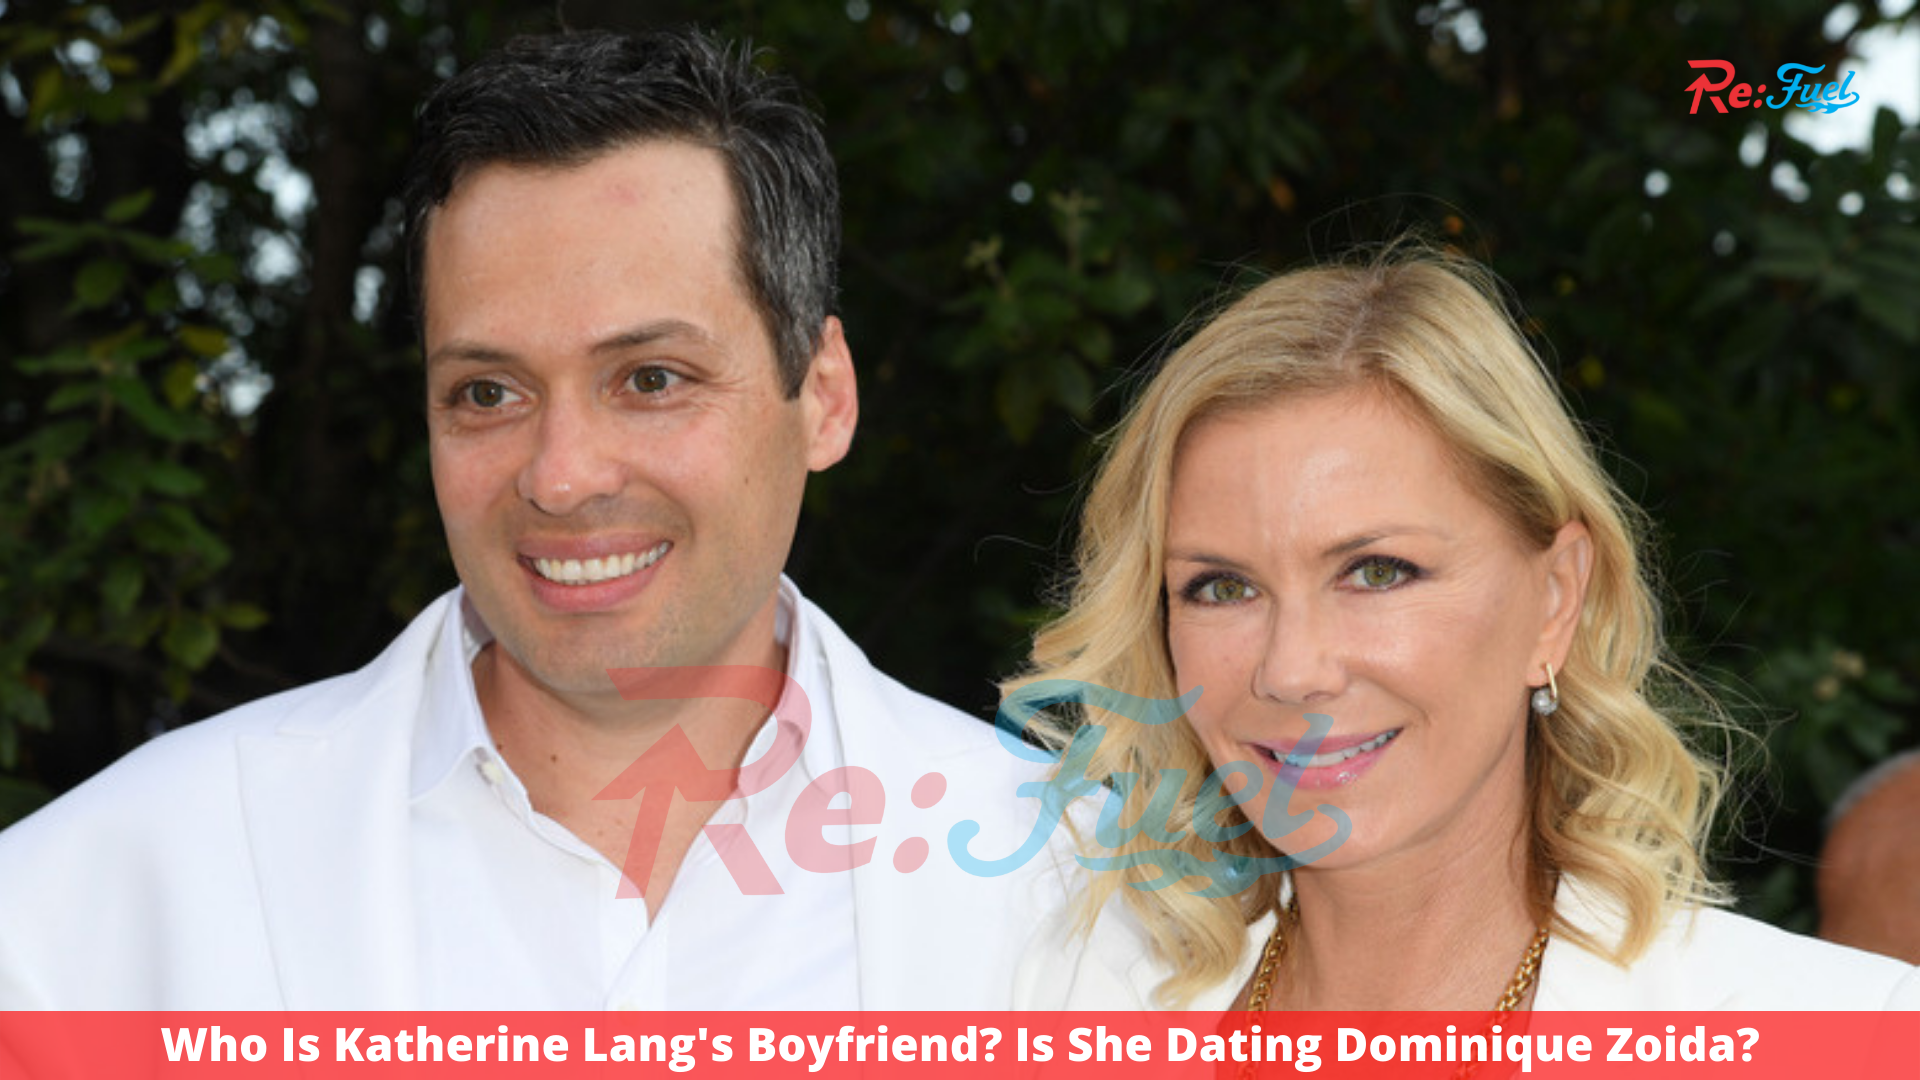 Who Is Katherine Lang's Boyfriend? Is She Dating Dominique Zoida?